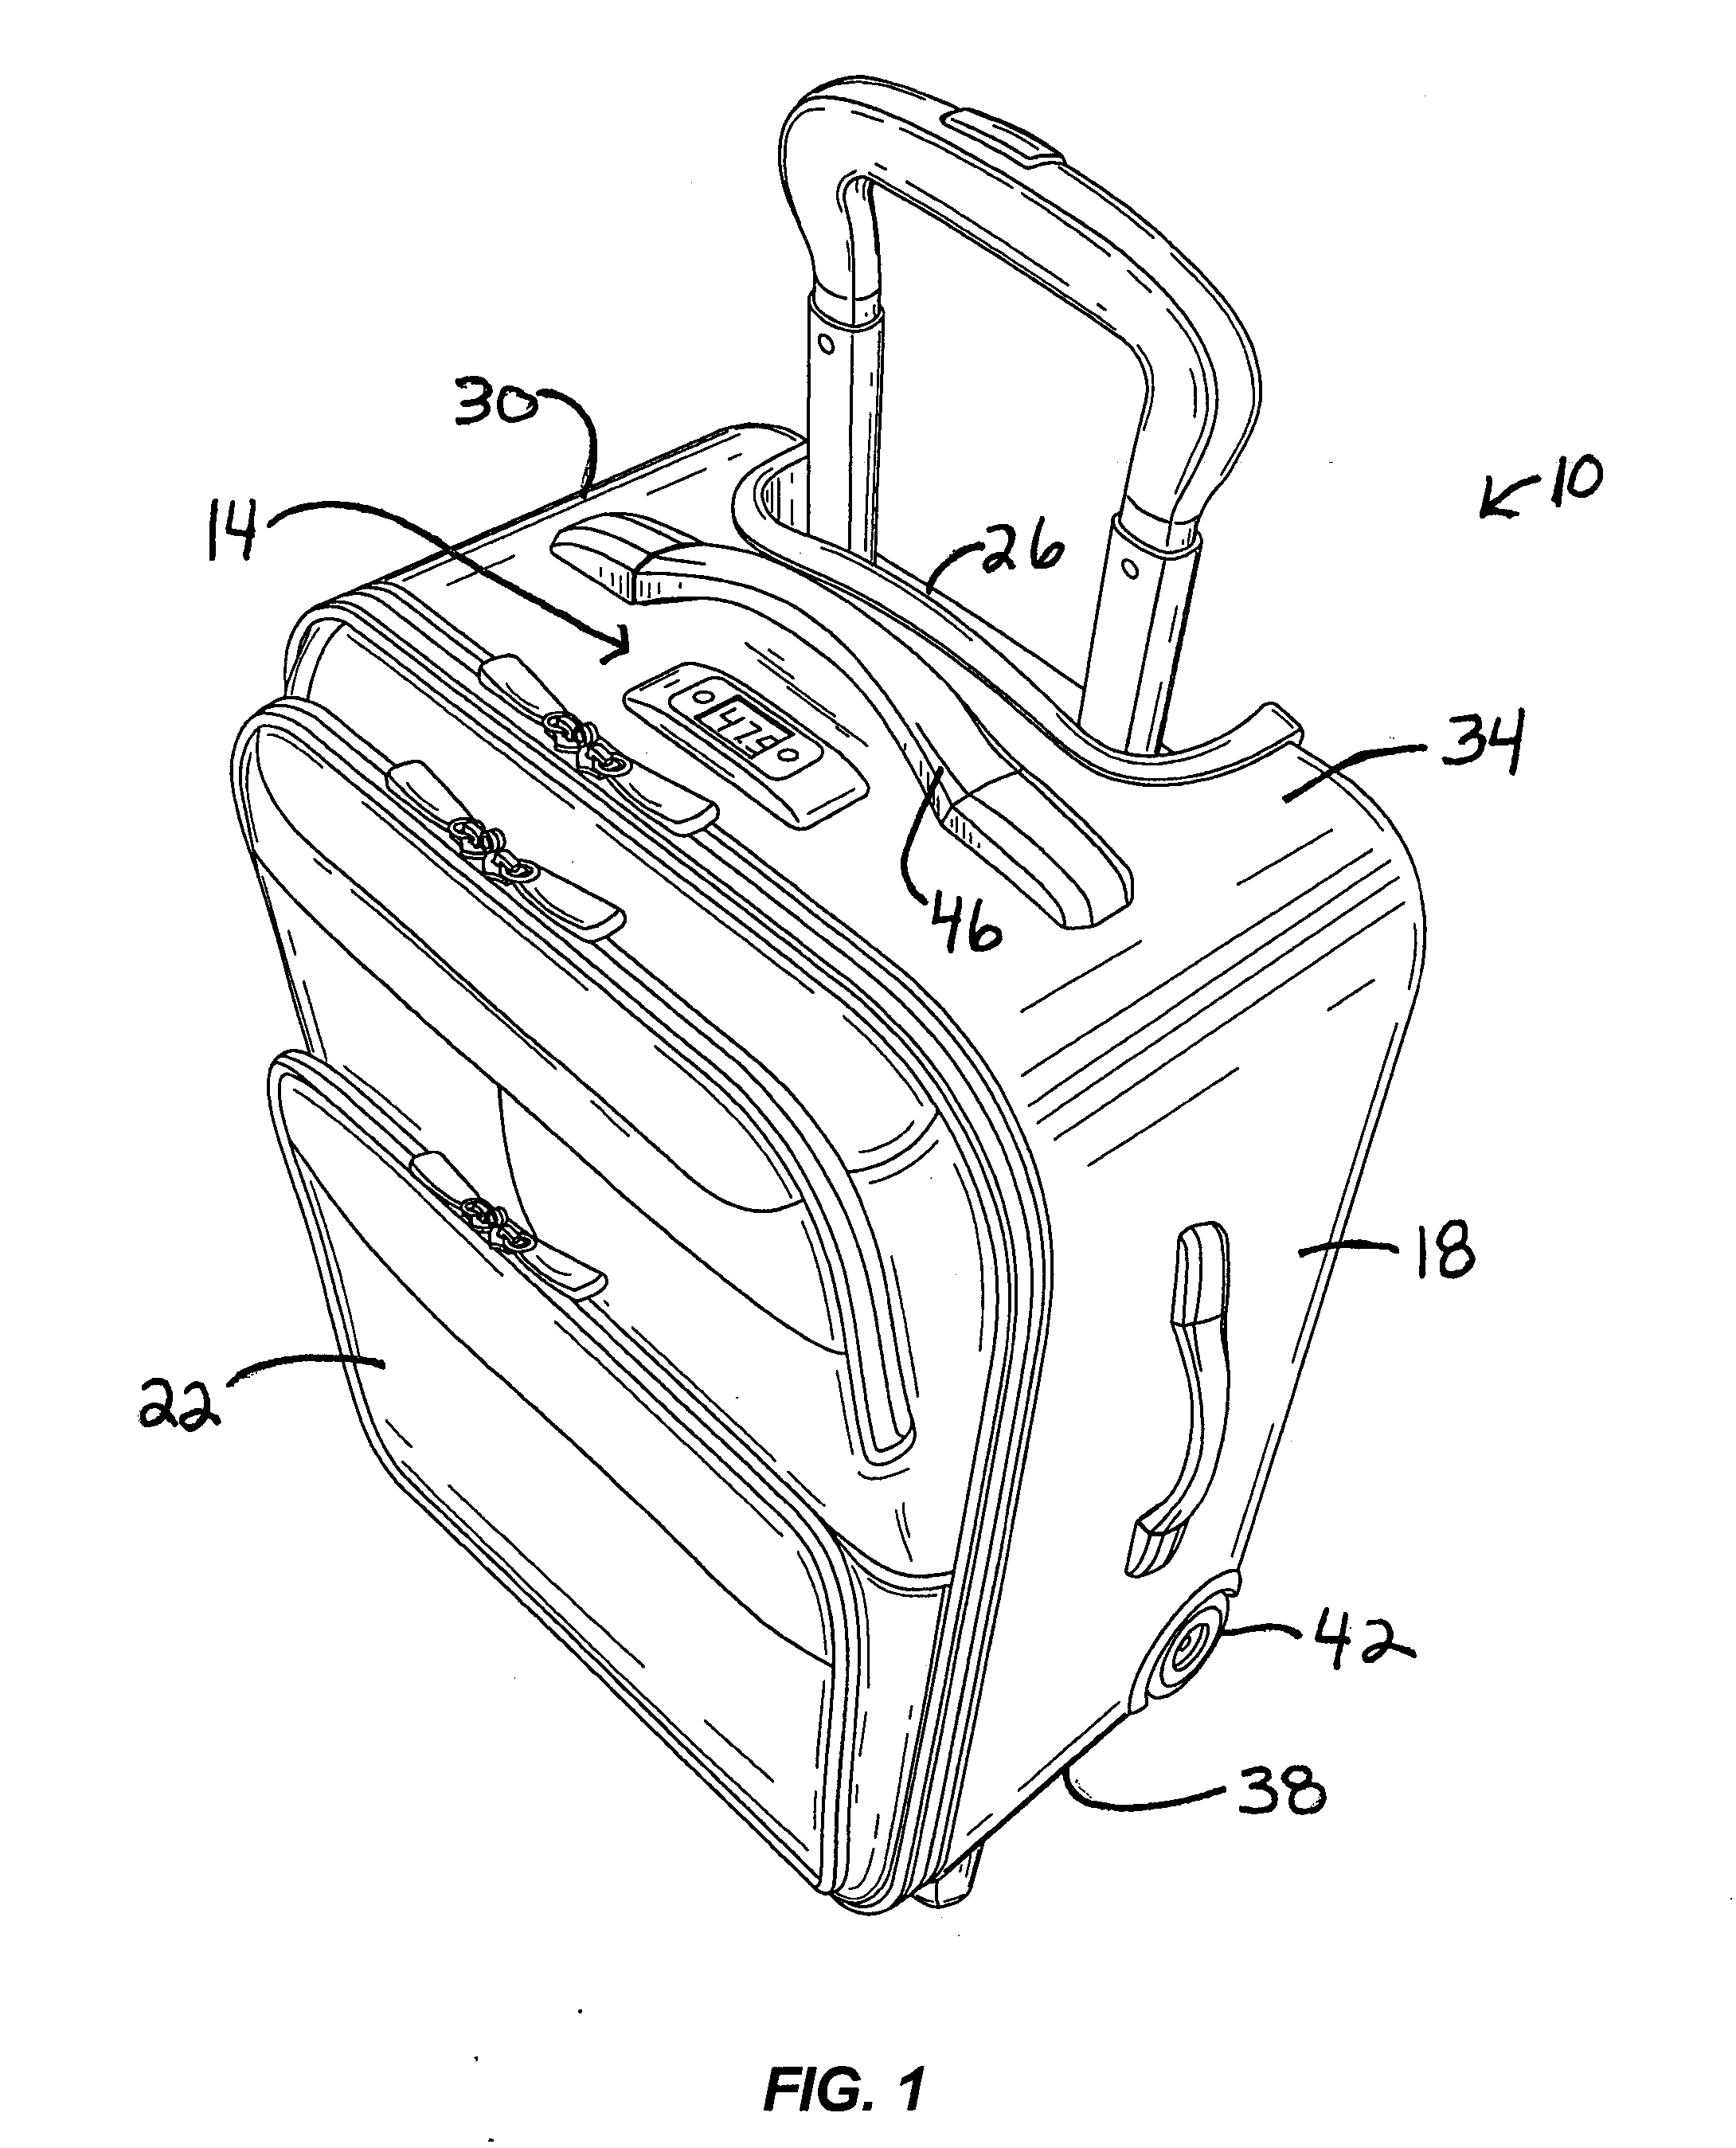 Luggage with built-in weight measurement device and method of use